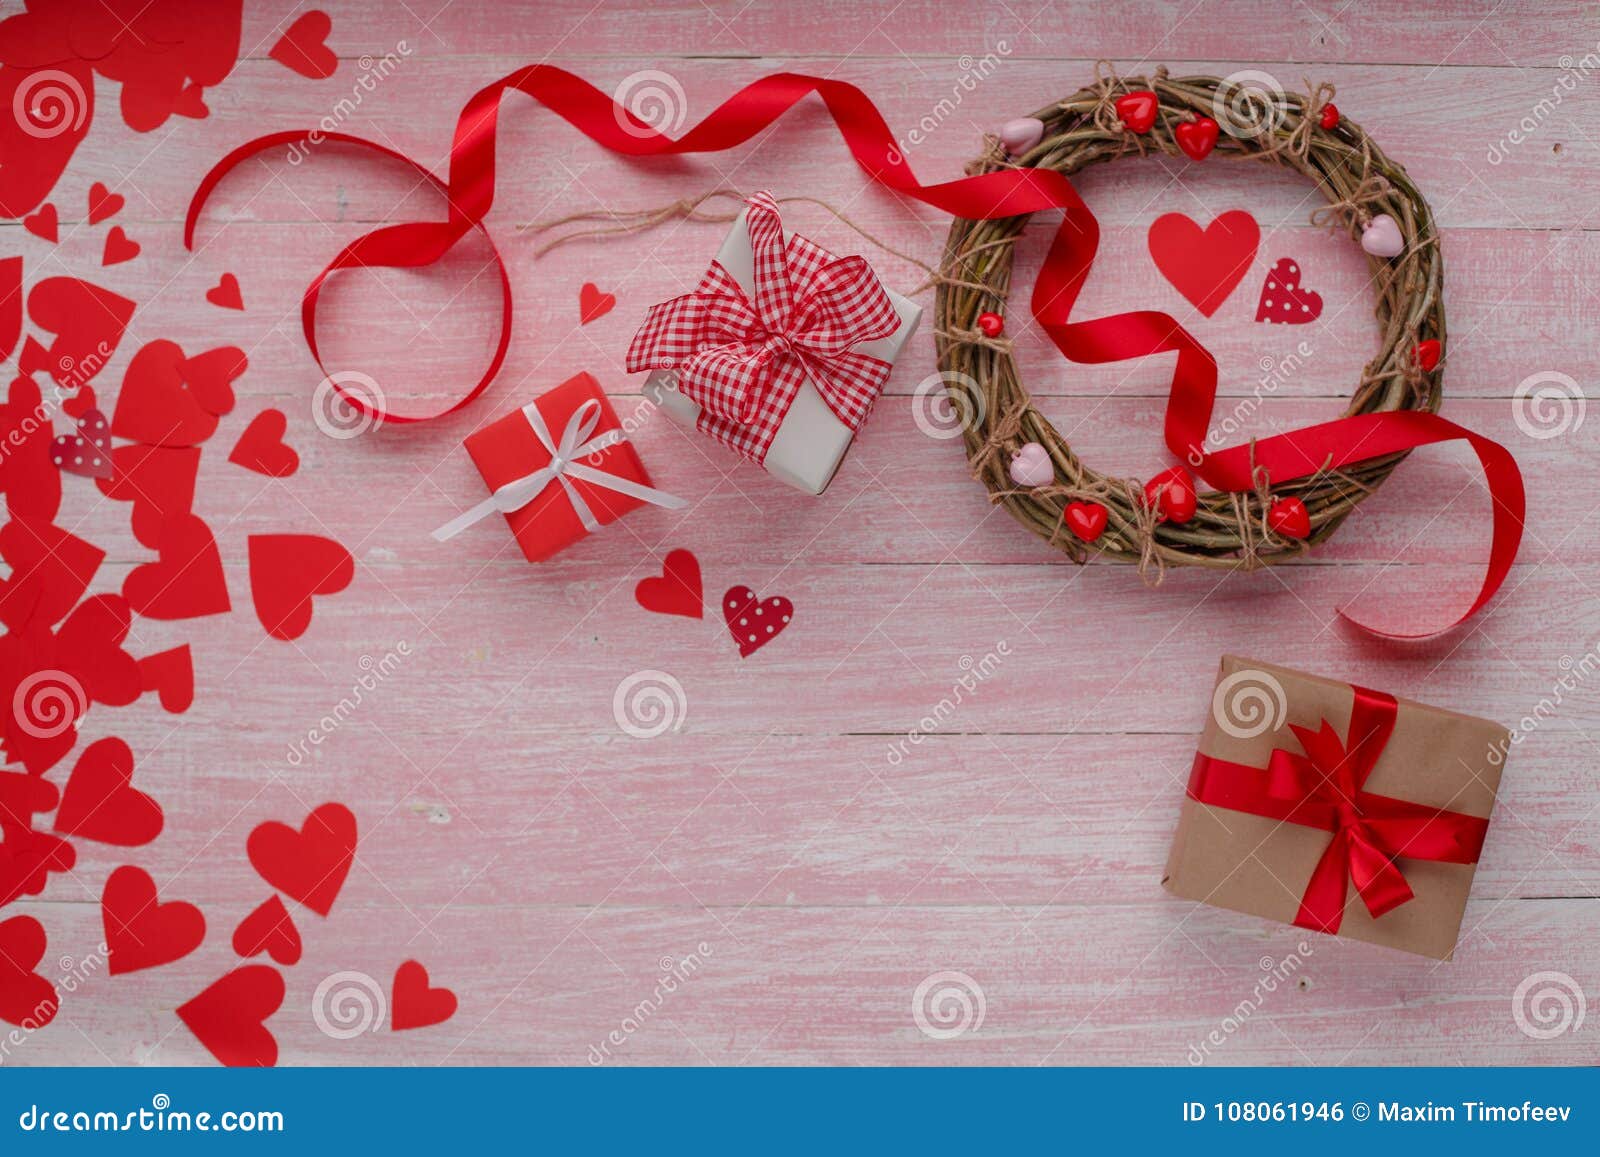 Happy Valentines Day Love Celebration in a Rustic Style Isolated. Stock ...